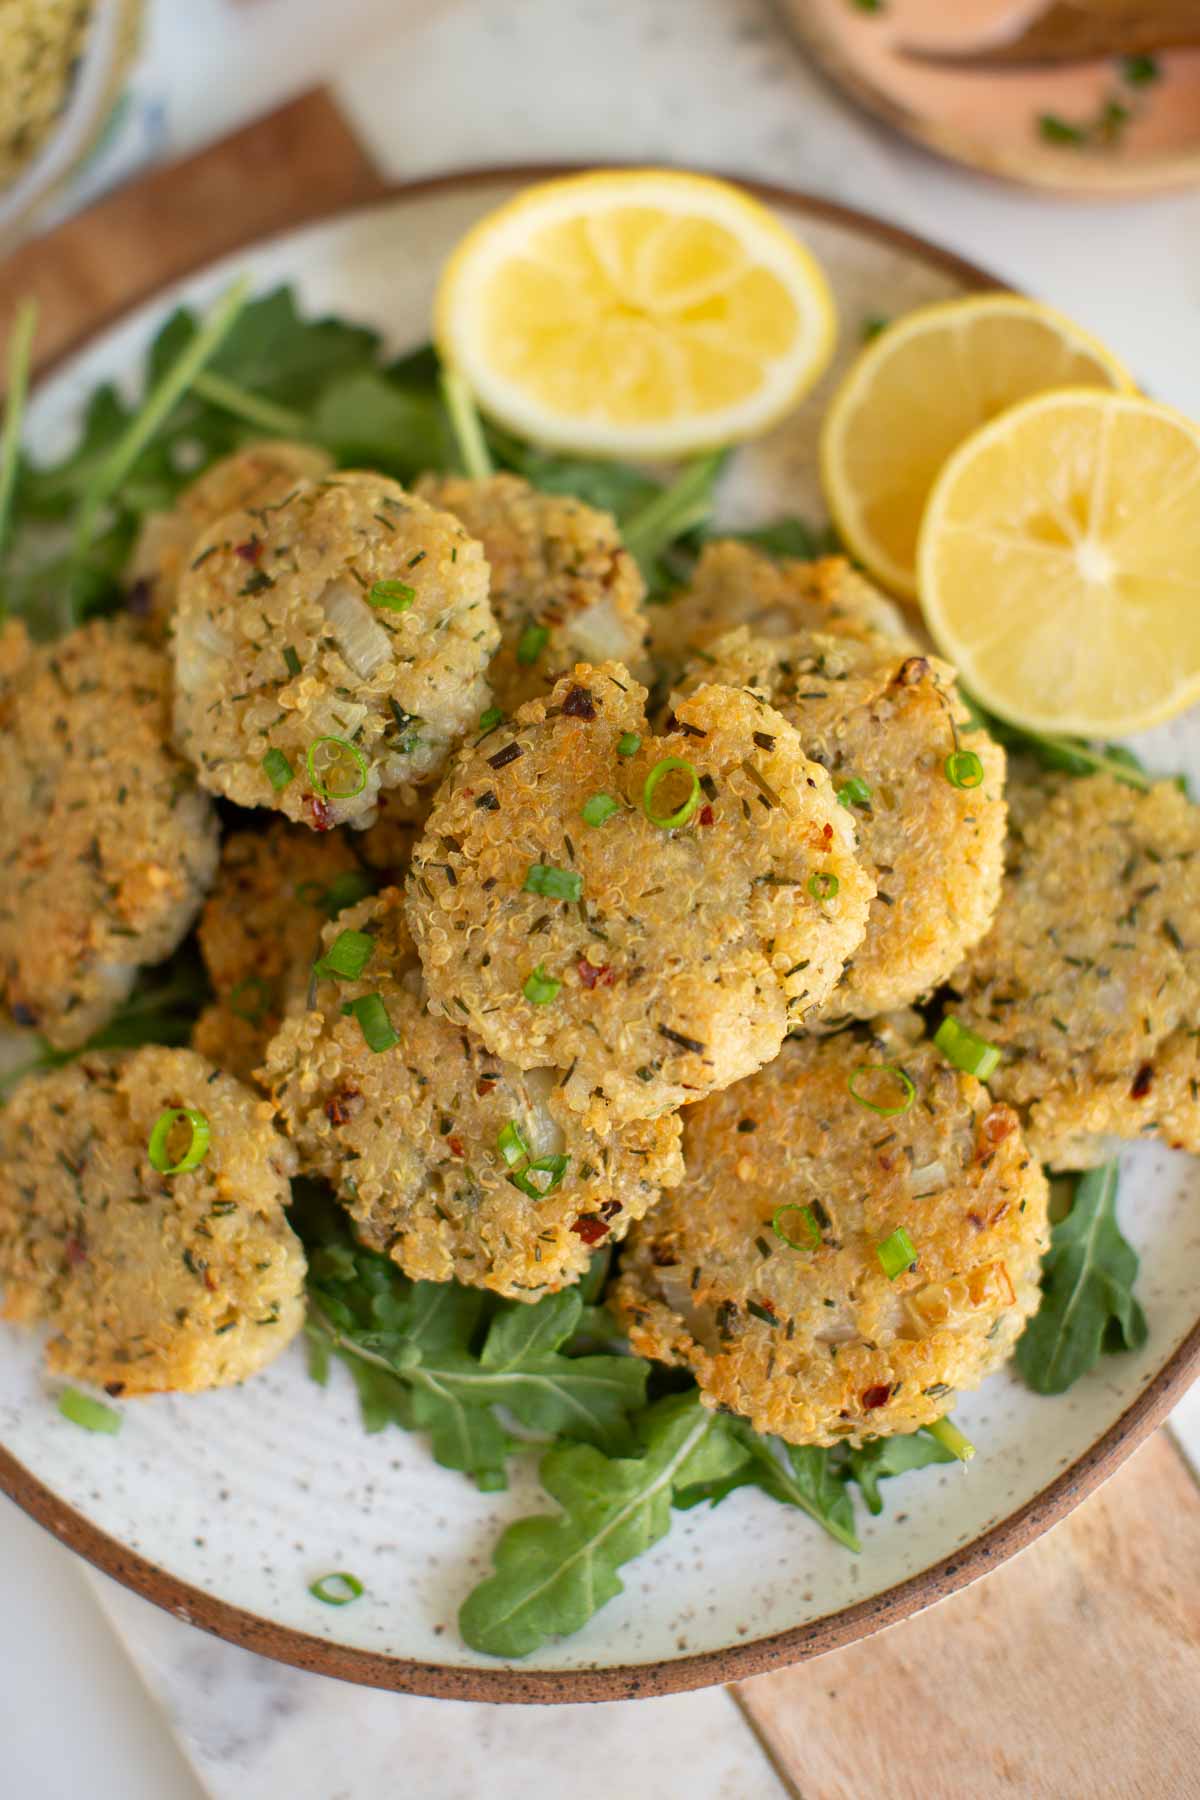 A plate of quinoa nugget bites served over a bed of arugula and served with sliced lemons.